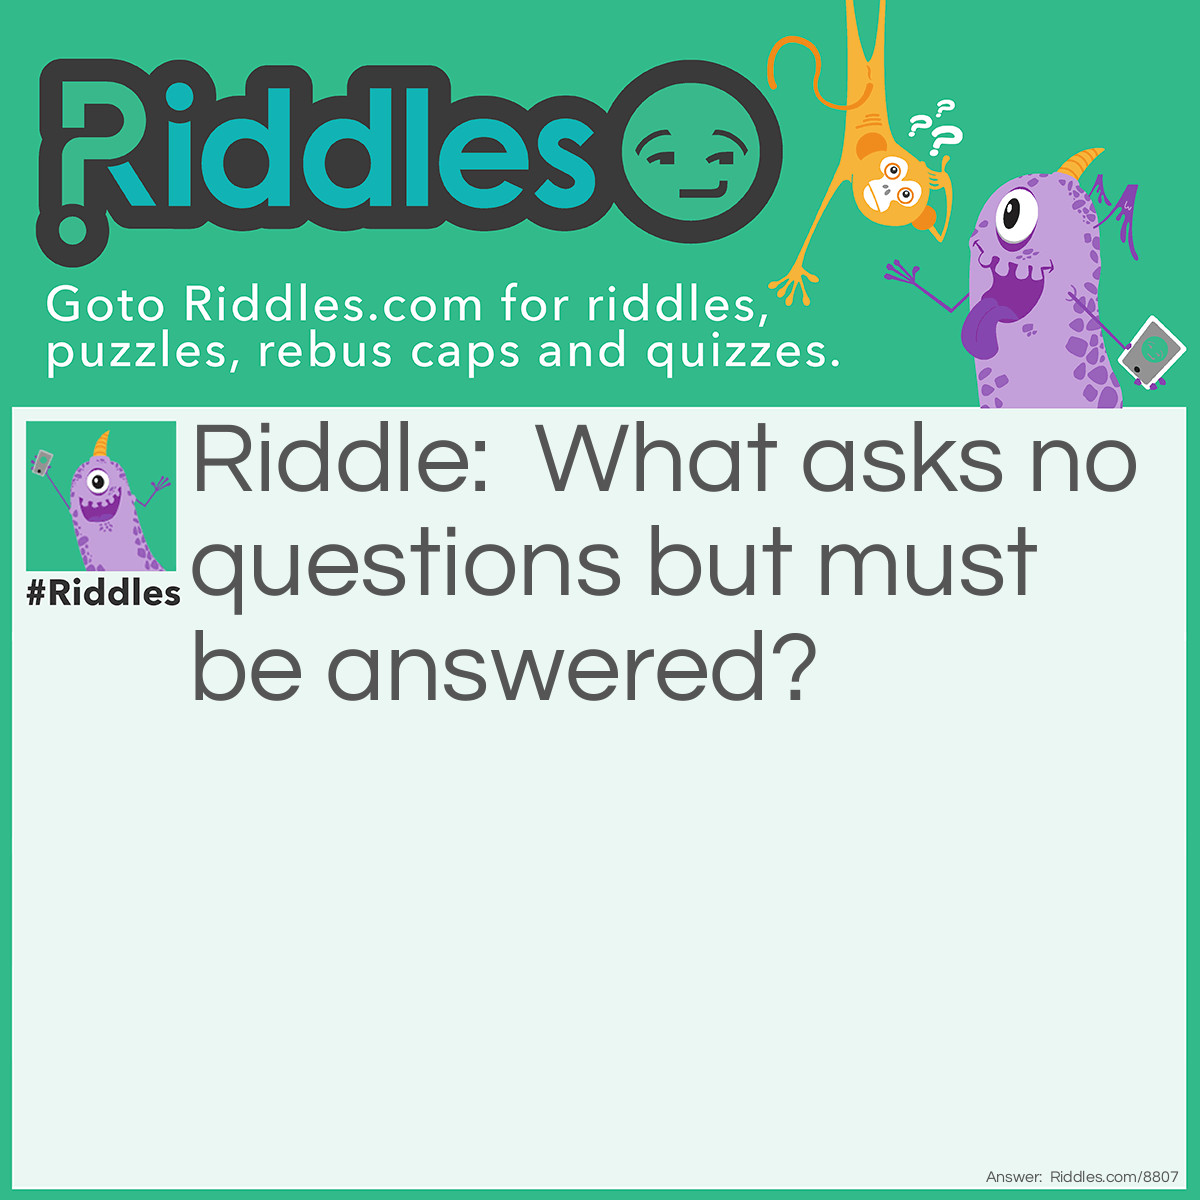 Riddle: What asks no questions but must be answered? Answer: A Doorball